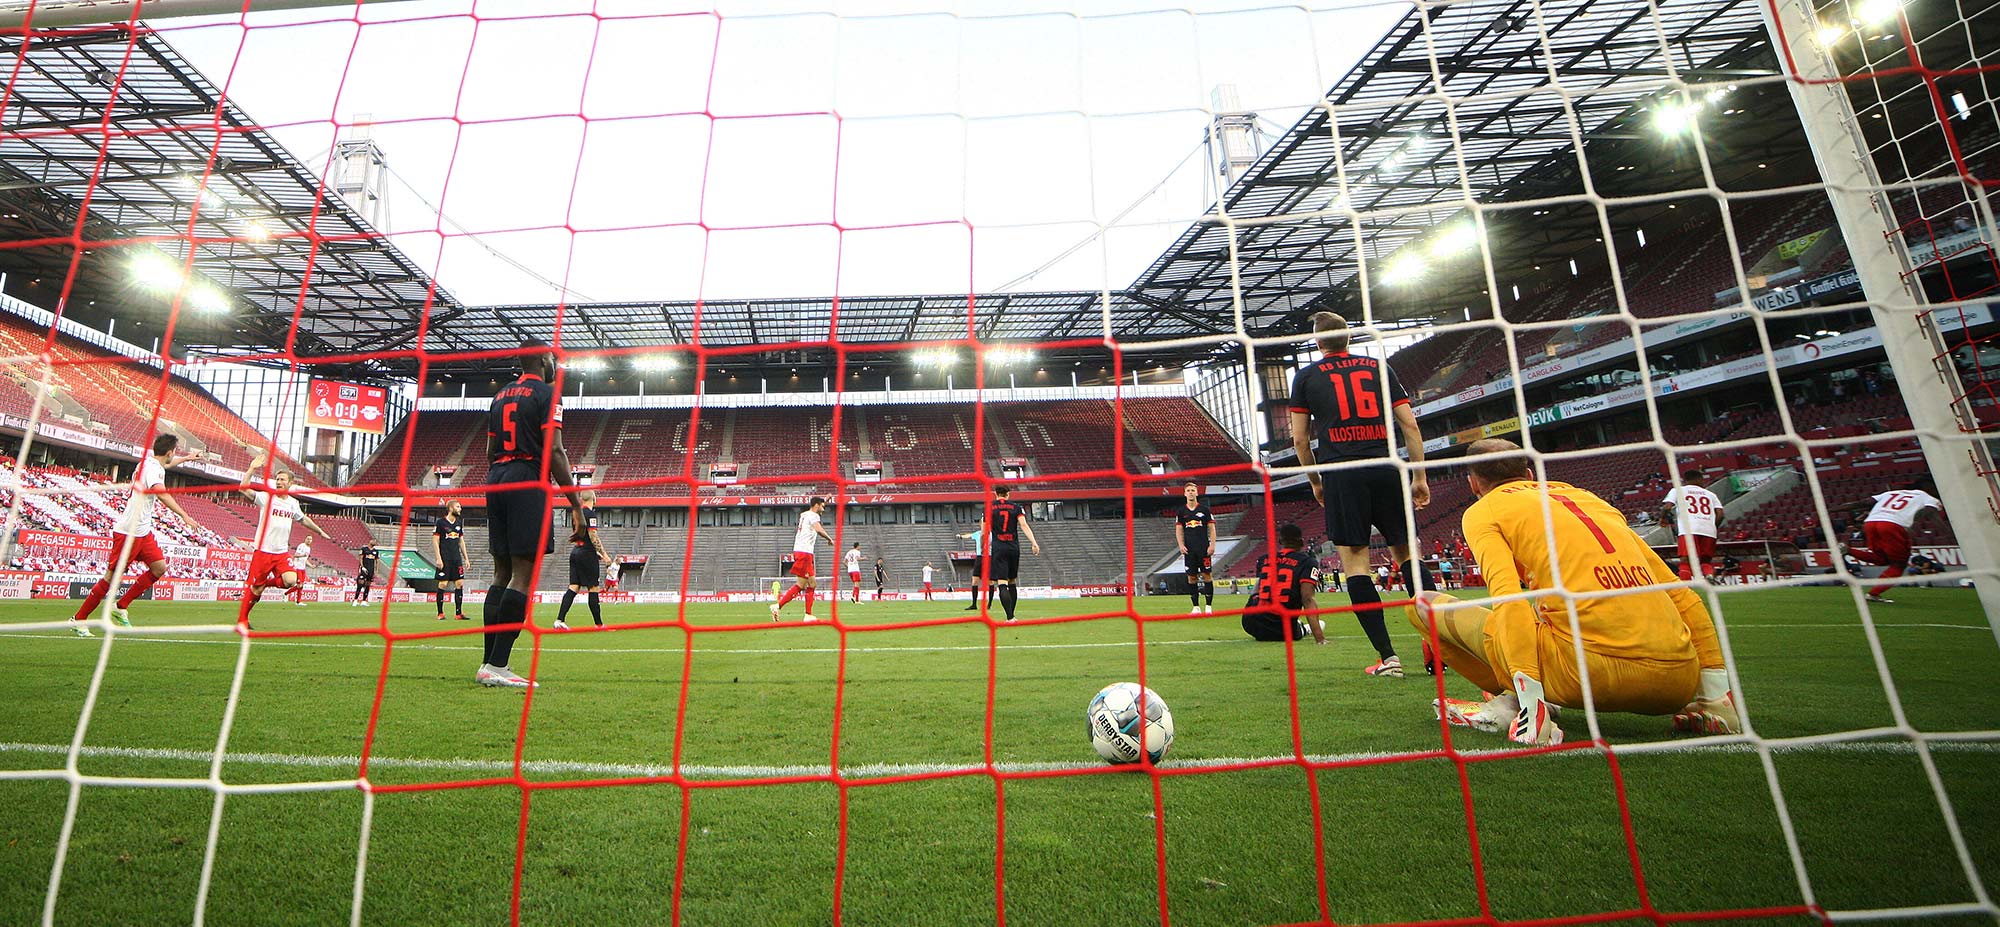 Photo of a Bundesliga match, FC Cologne v RB Leipzig. Pictured is RB goalkeeper, Peter Gulacsi, remote, and FC's Jhon Cordoba, Cordoba, sports: football. The photo is taken from behind the net, an empty stadium is seen in the background. Match was played on June 1, 2020.